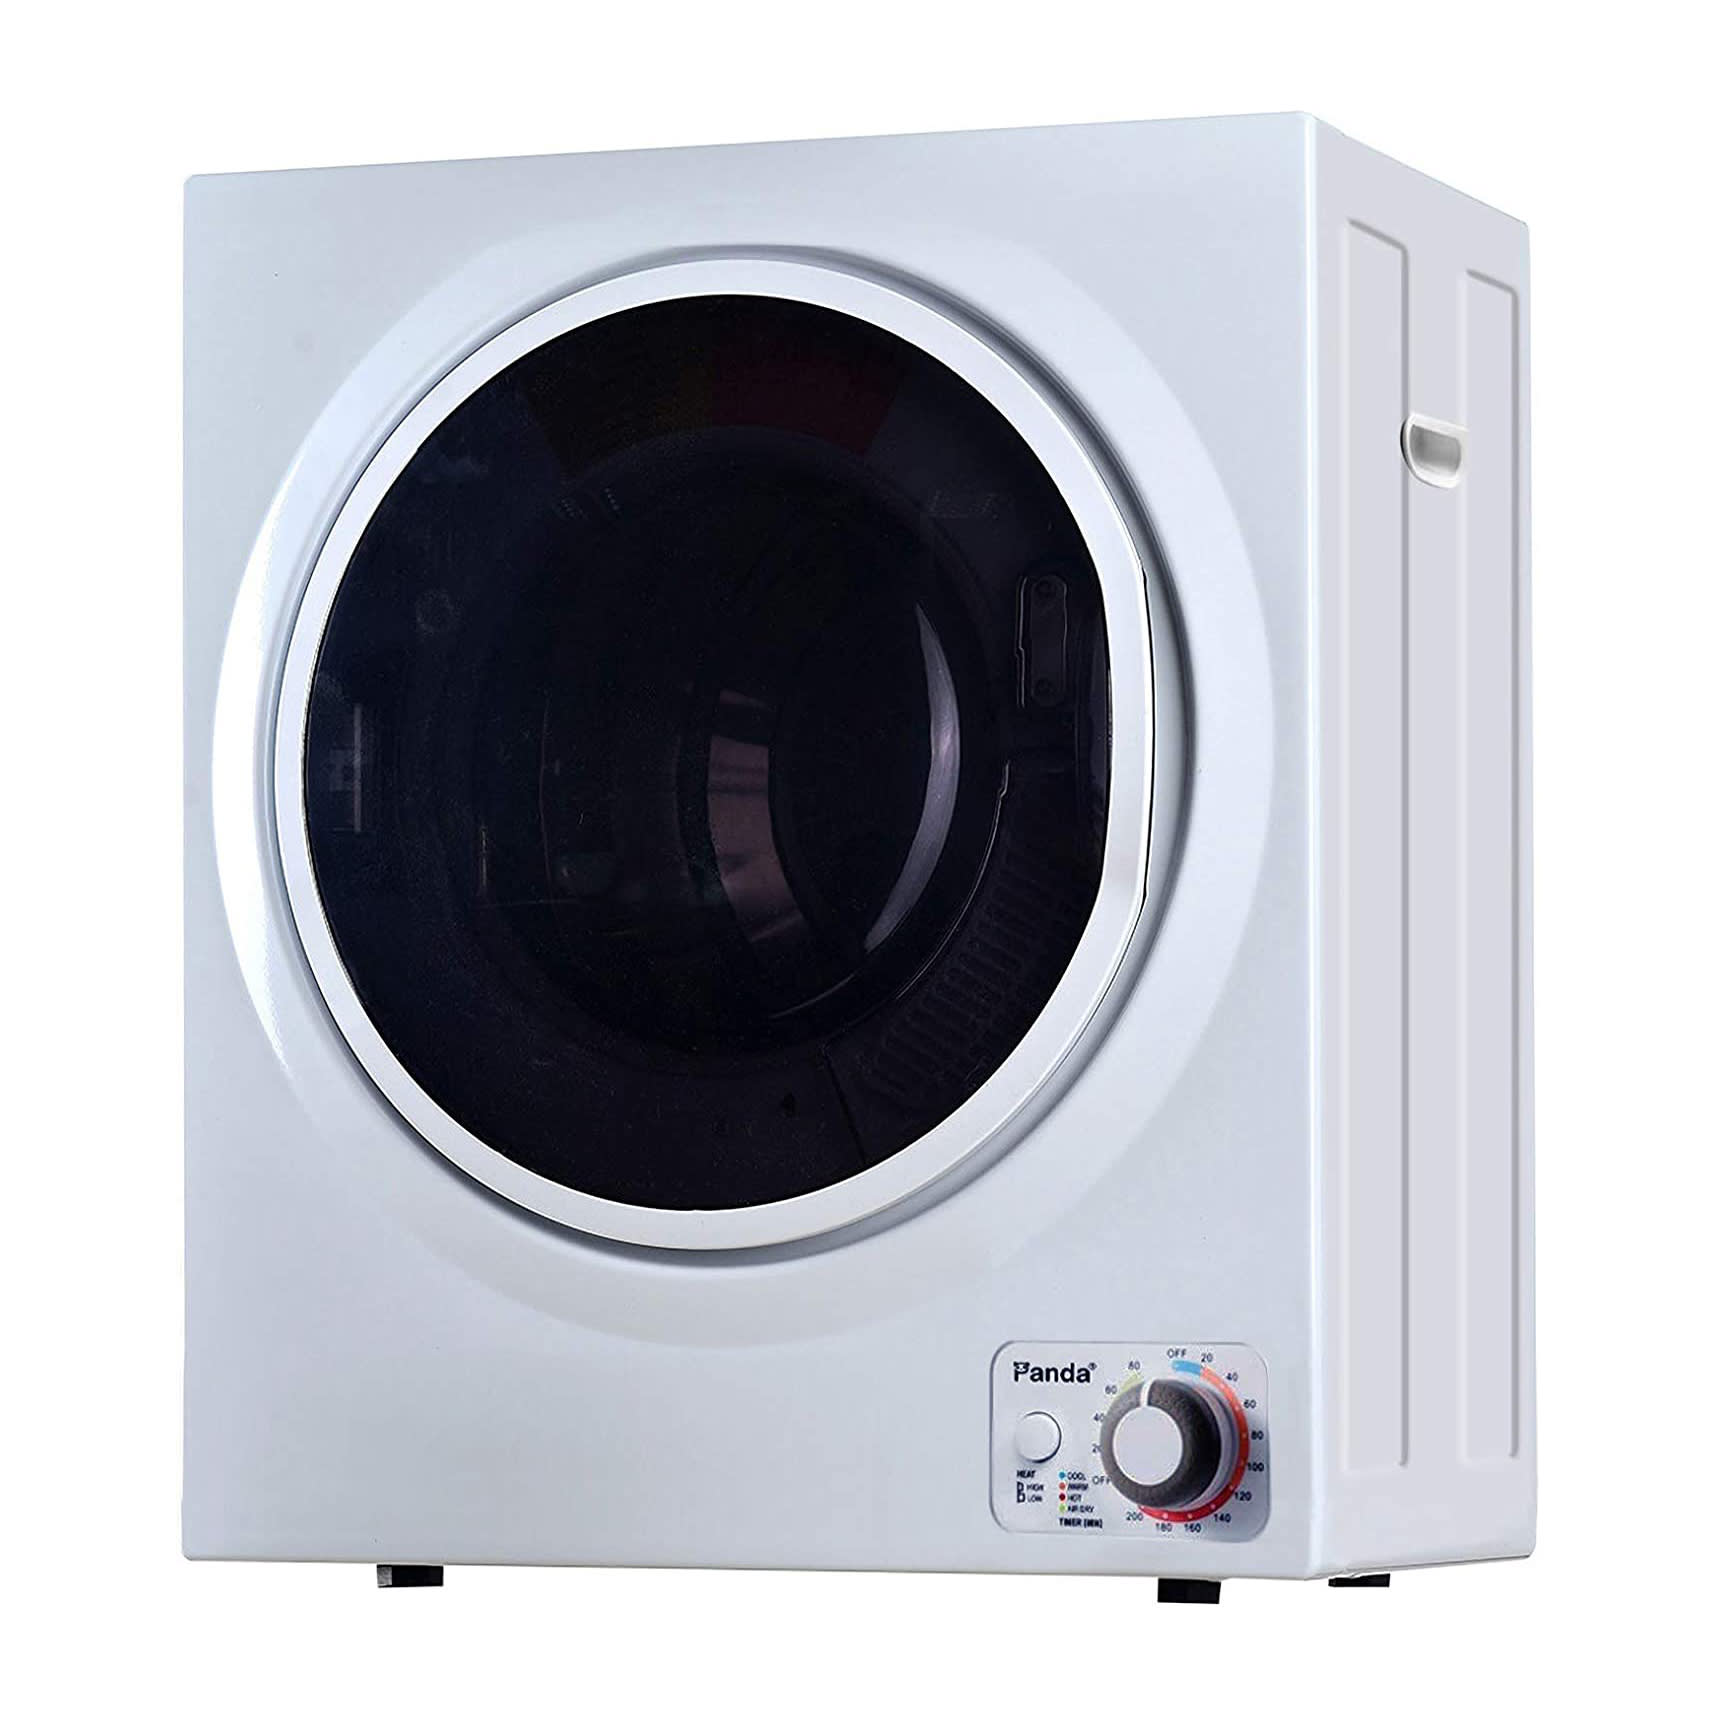 Best Electric Portable Clothes Dryer 2023, Top 5 Best #dryermachine On  Your Budget